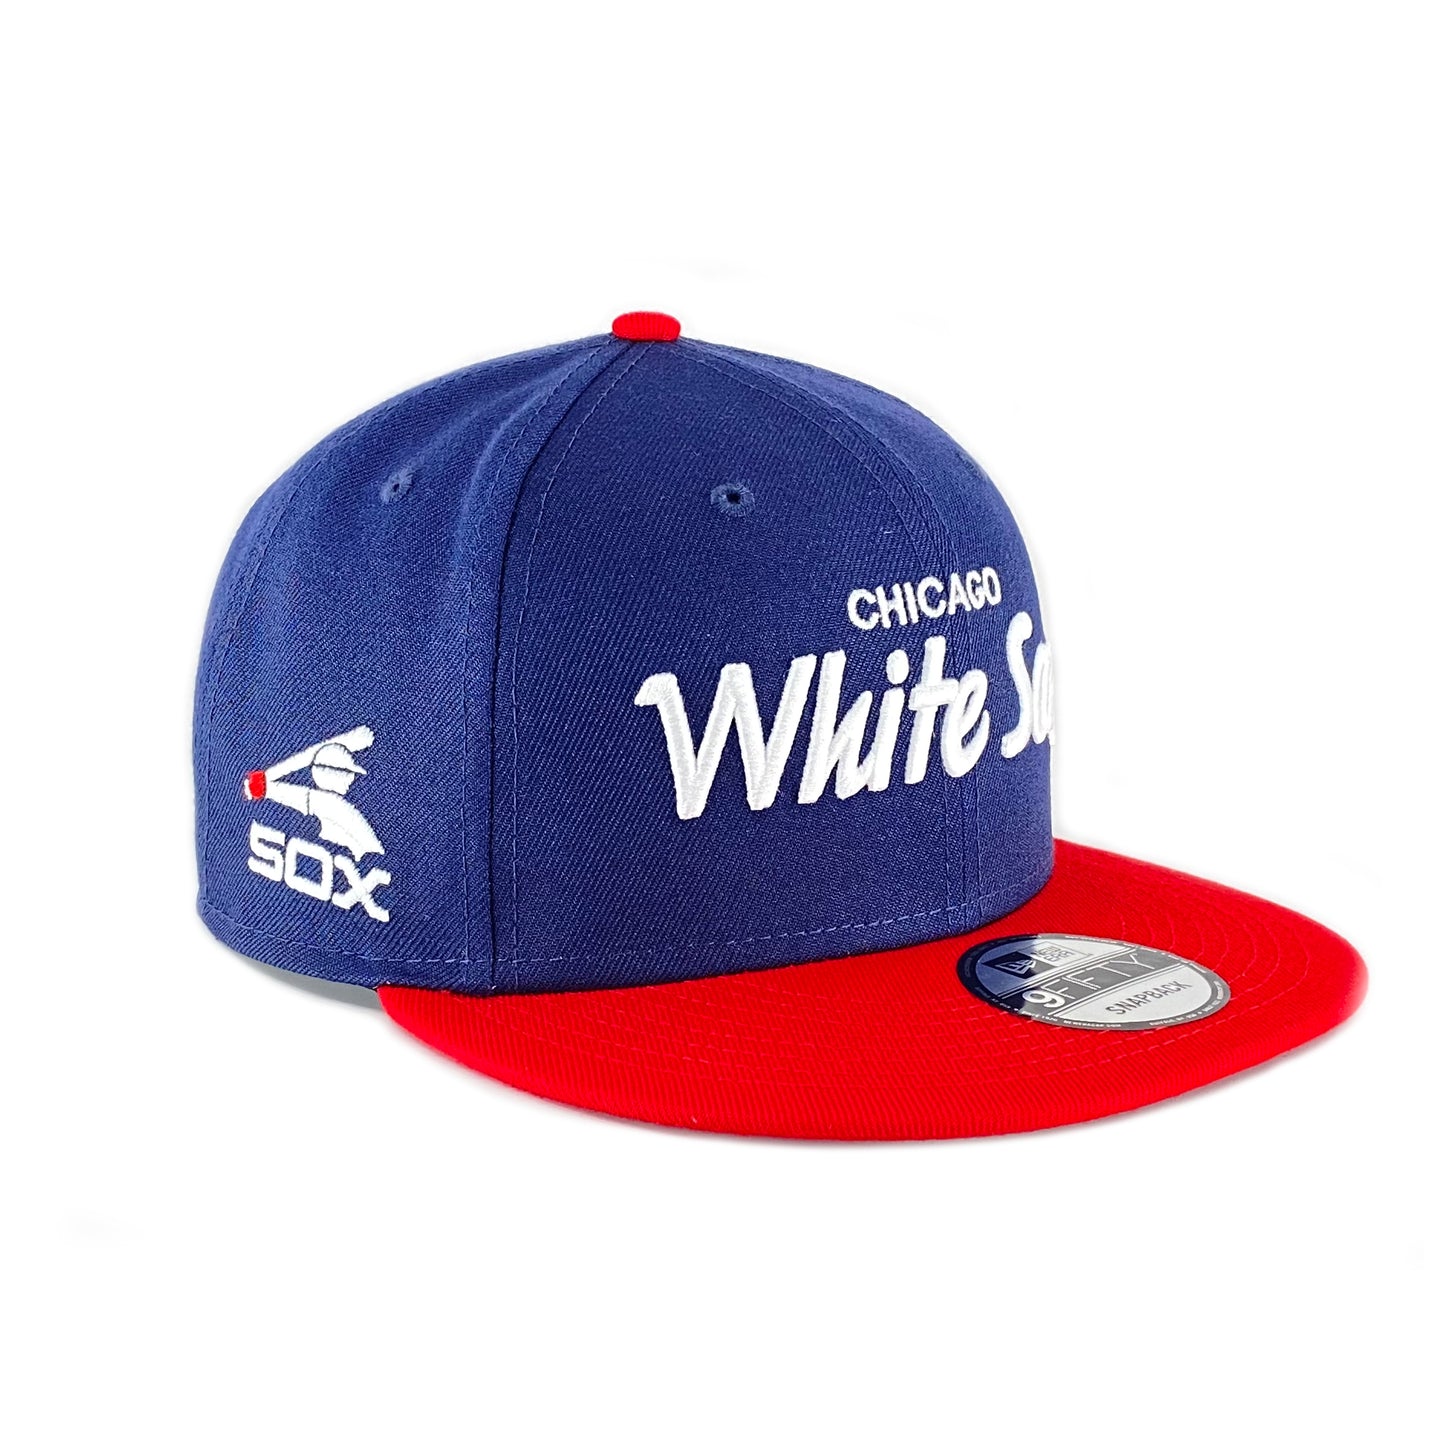 Chicago White Sox Chase Script Navy/Red New Era 9FIFTY Snapback Hat